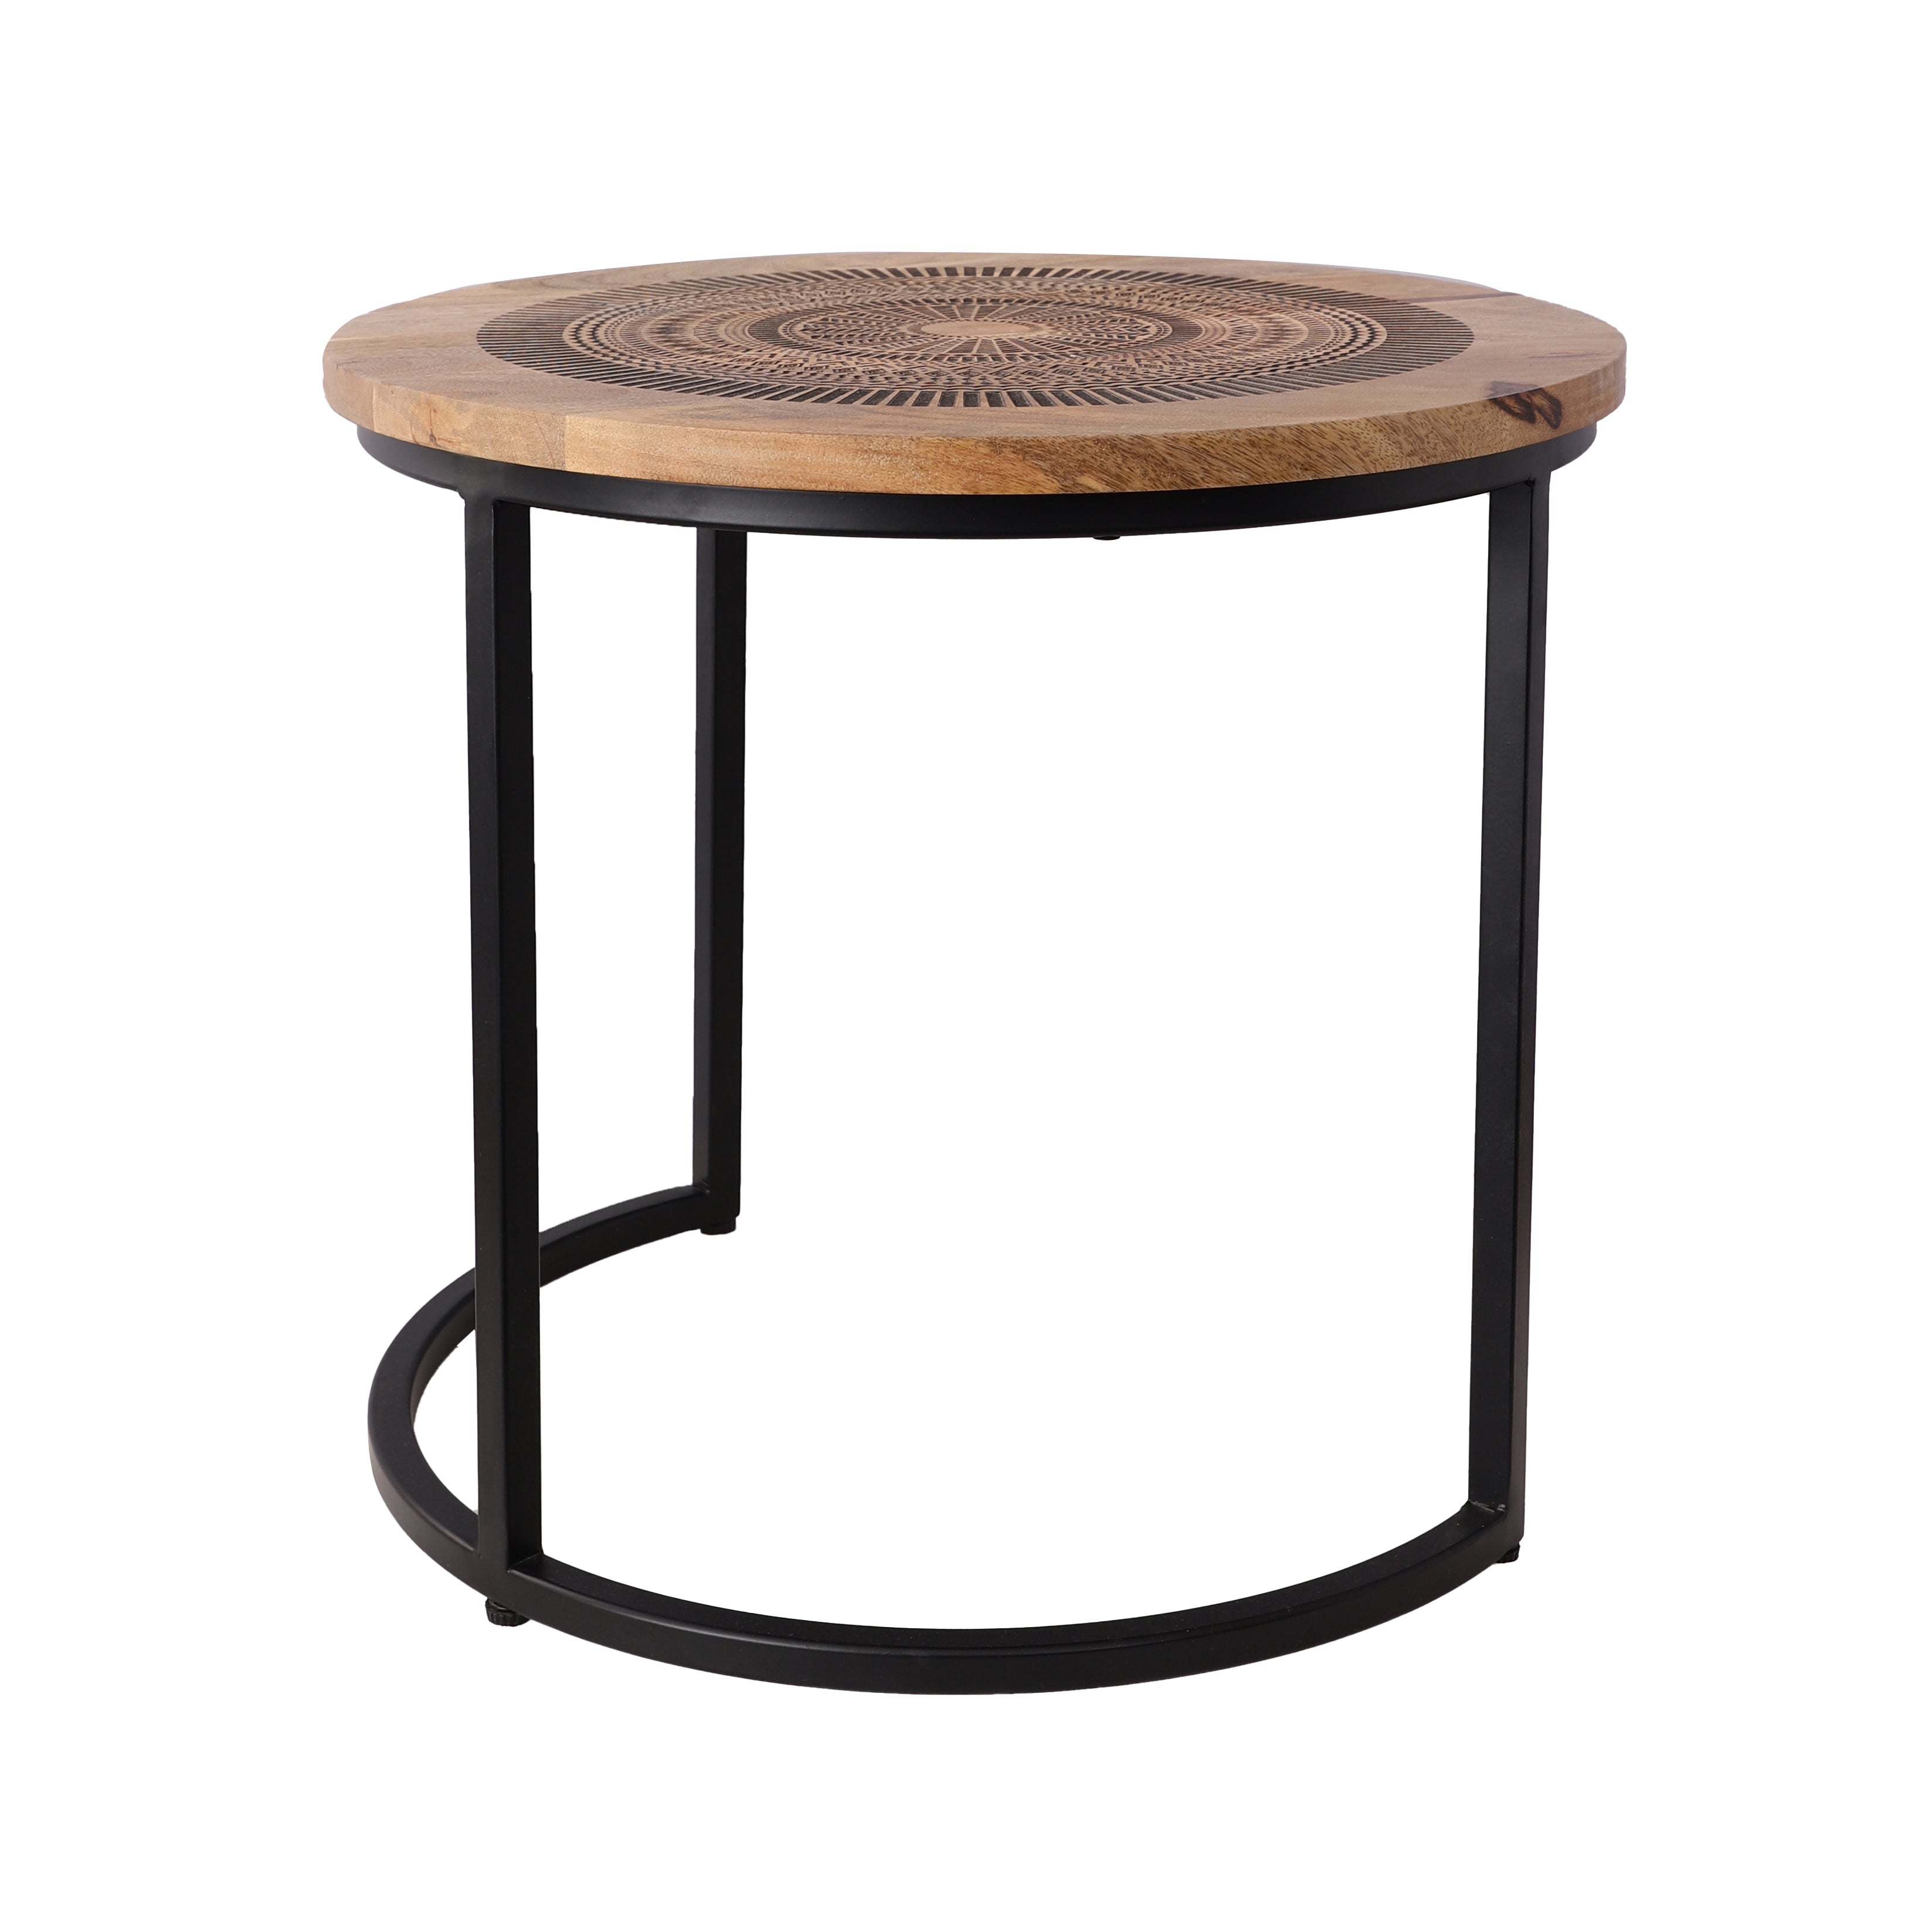 Wood and Metal Nested Tables/Stools (Set of 2)